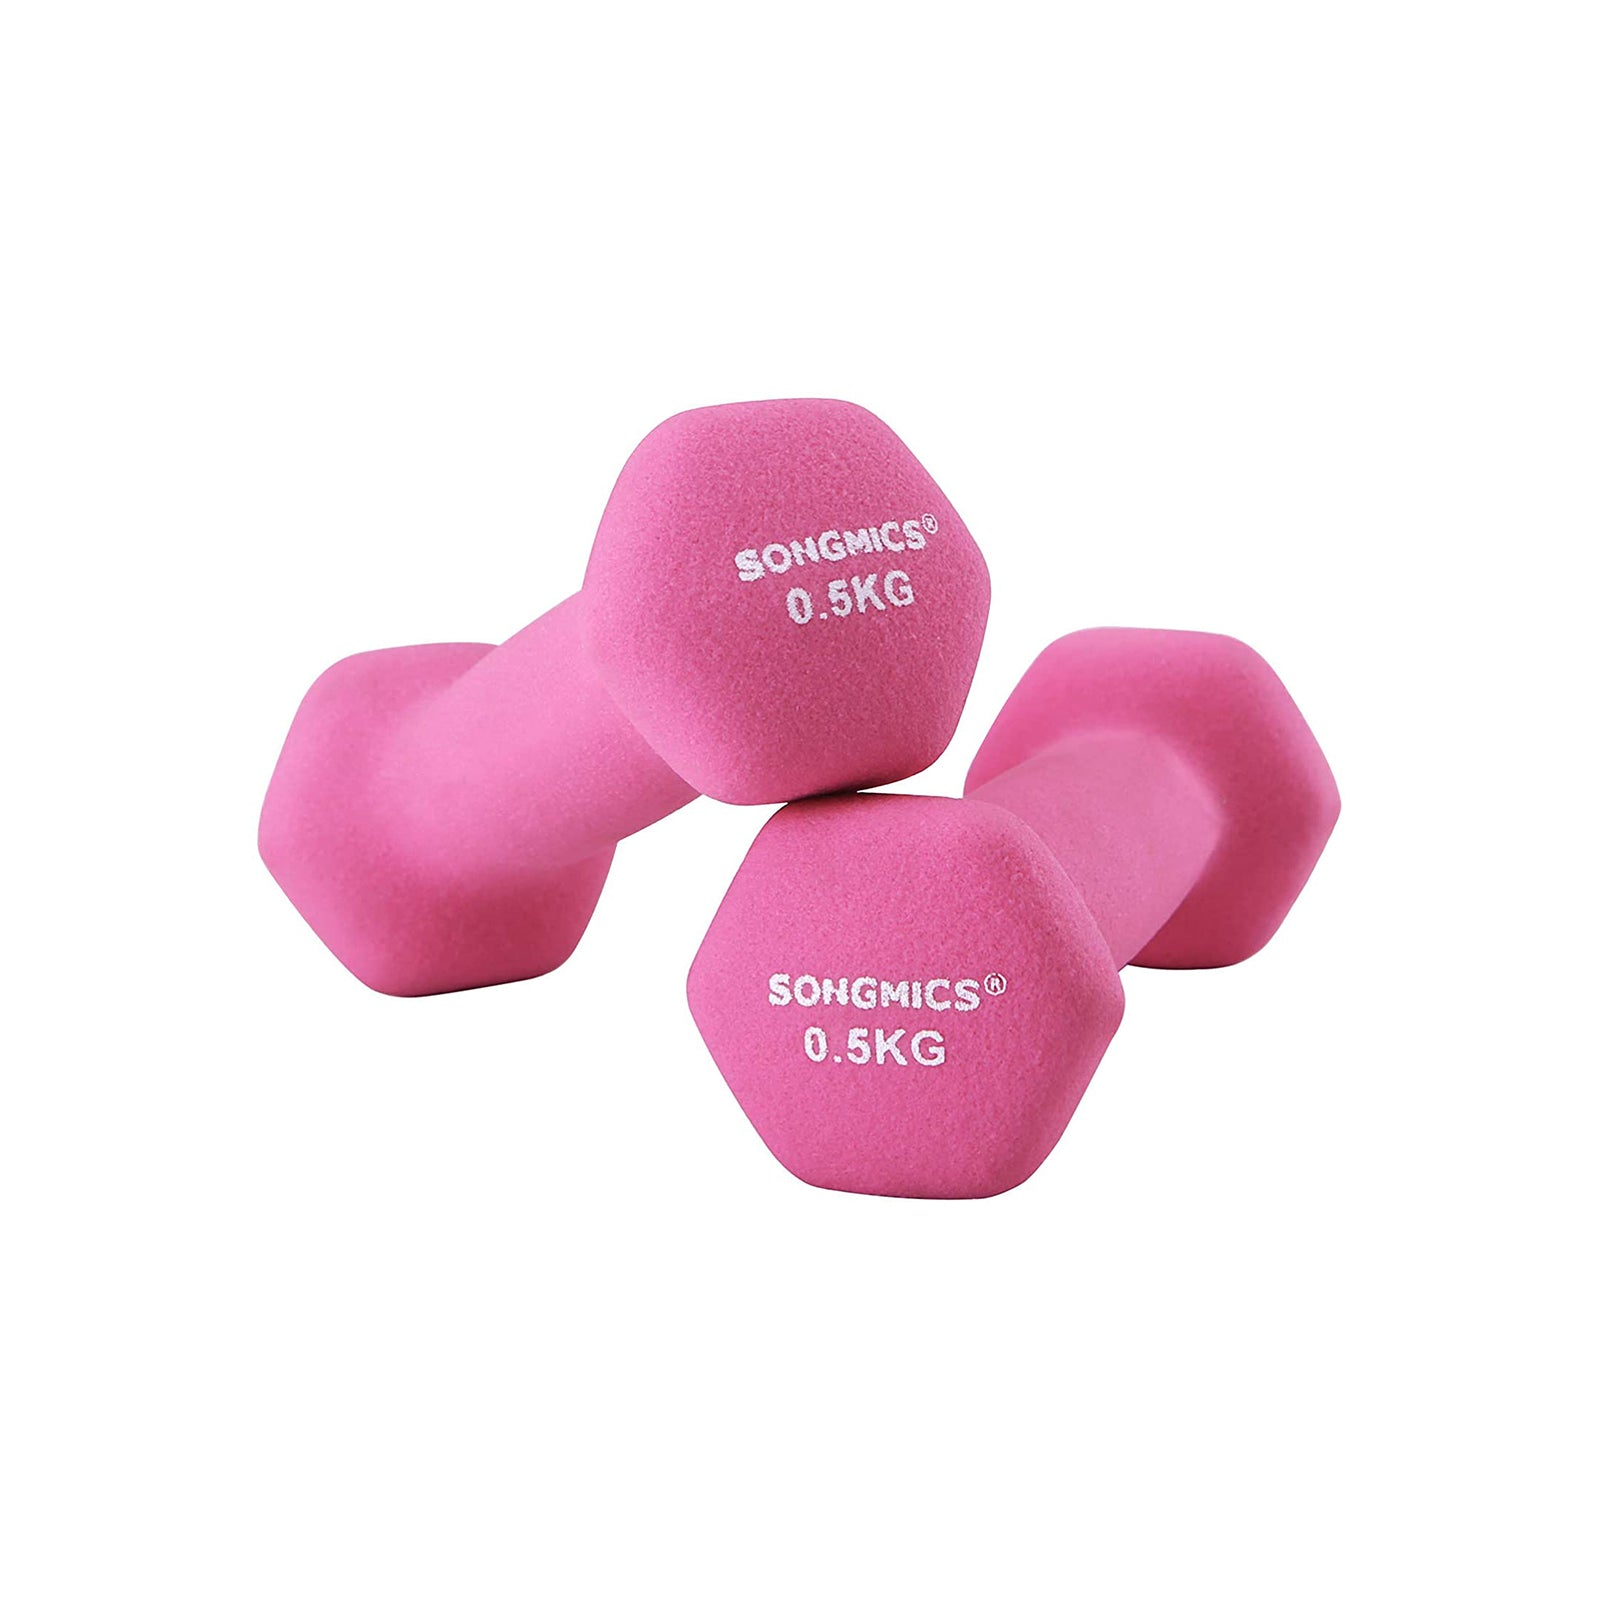 Image of SONGMICS Dumbbell Weights with Vinyl Coating, All-purpose Home Gym Fitness, Waterproof and Non-Slip with Matte Finish, Dumbbells Set 0.5 kg (pair),